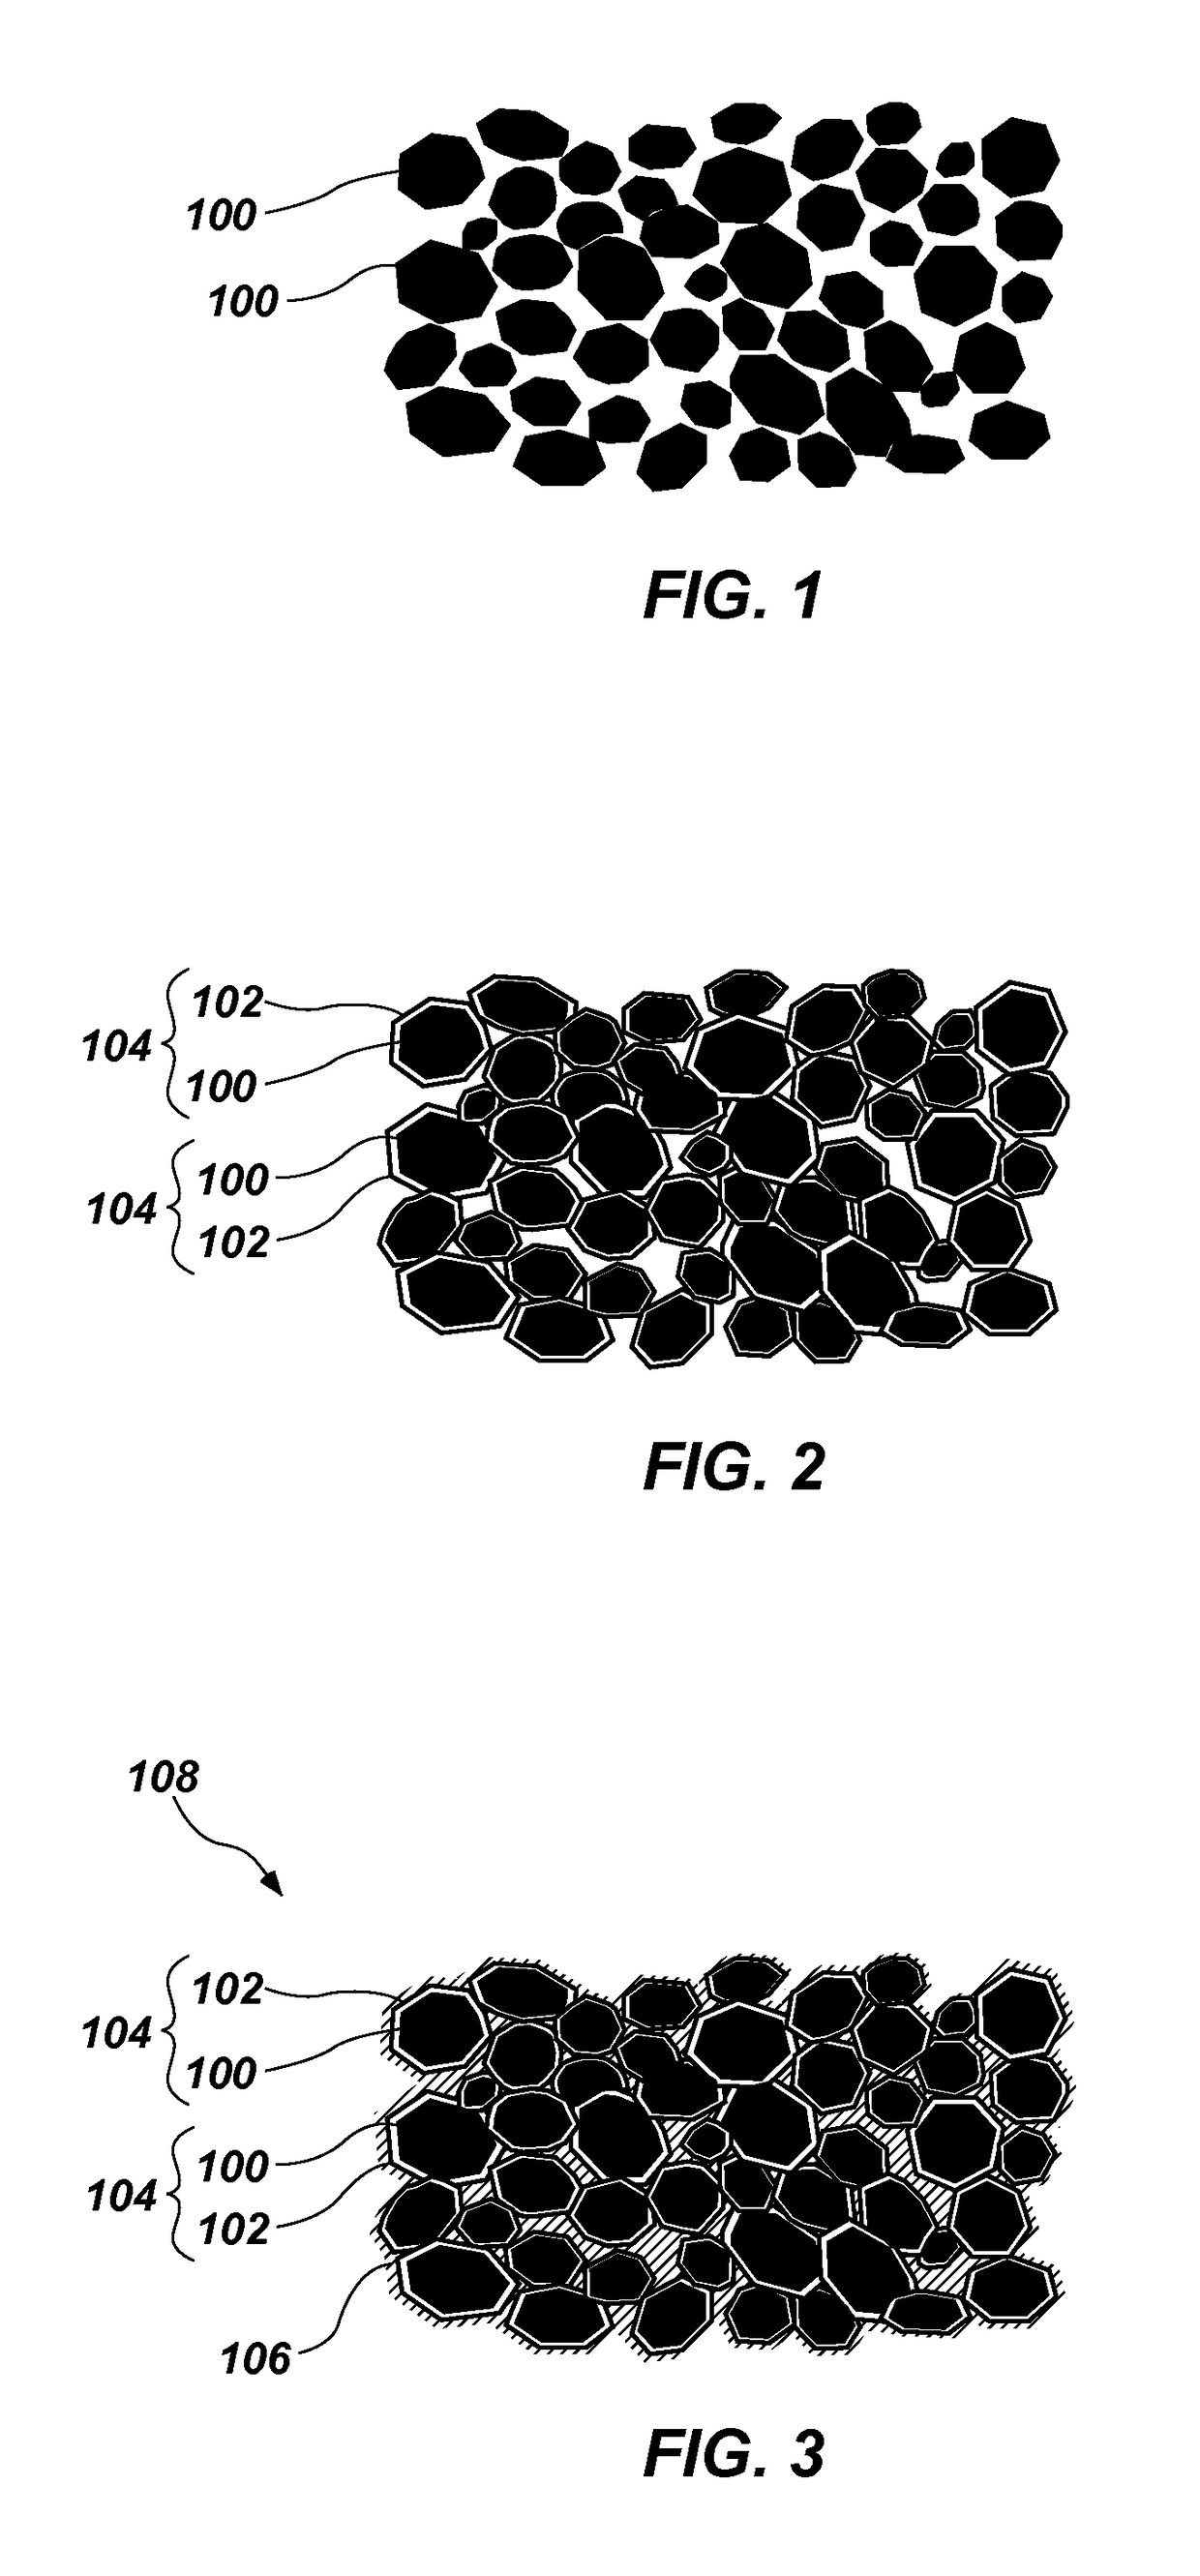 Methods of fabricating polycrystalline diamond by functionalizing diamond nanoparticles, green bodies including functionalized diamond nanoparticles, and methods of forming polycrystalline diamond cutting elements